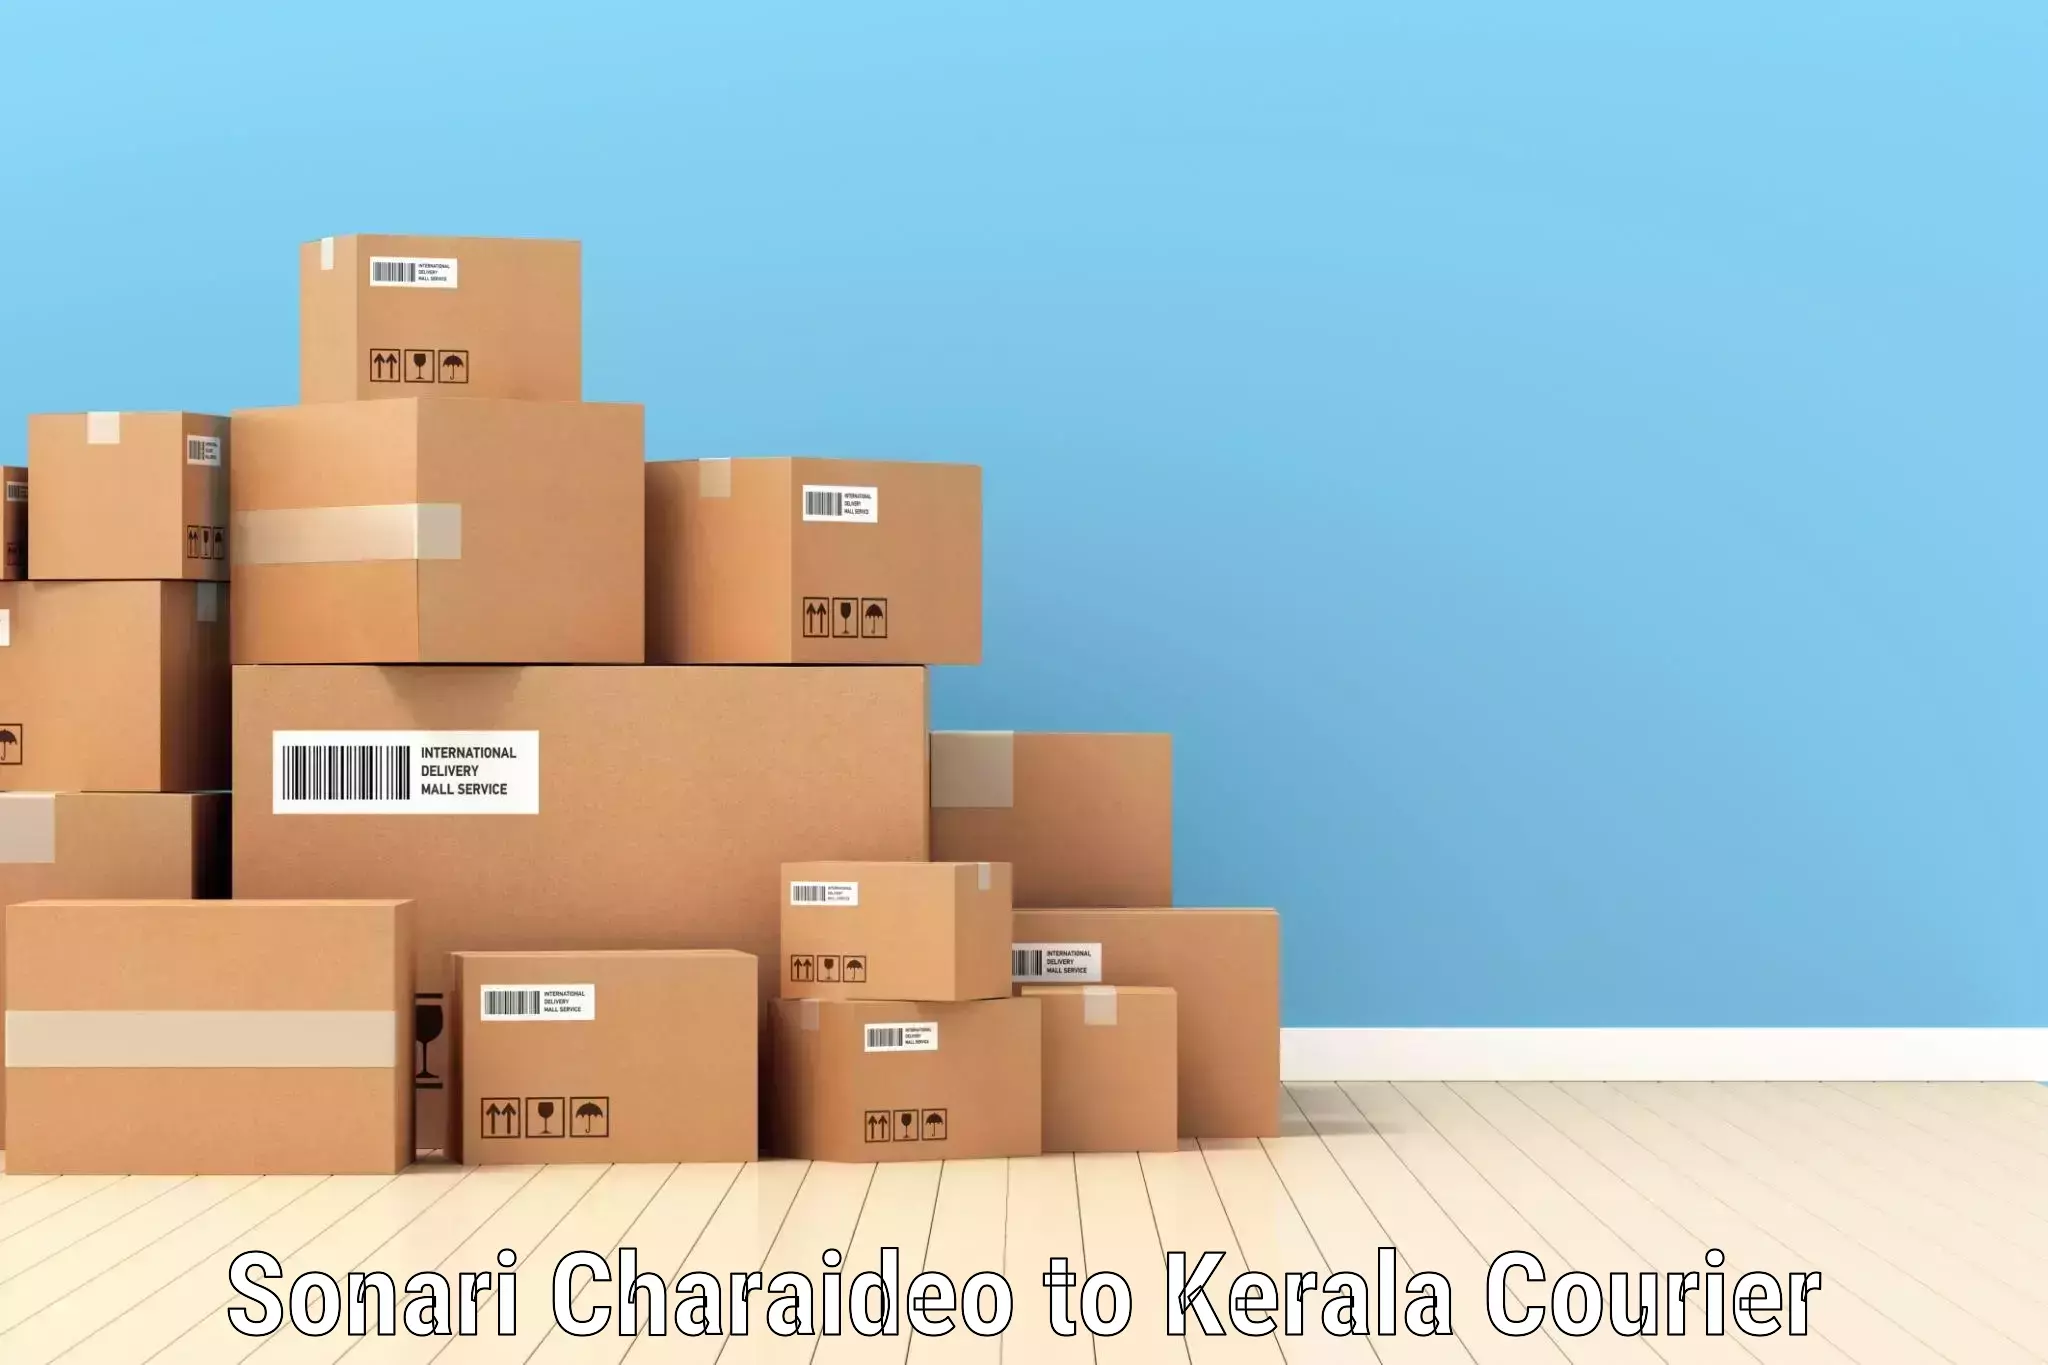 Round-the-clock parcel delivery in Sonari Charaideo to Cochin University of Science and Technology